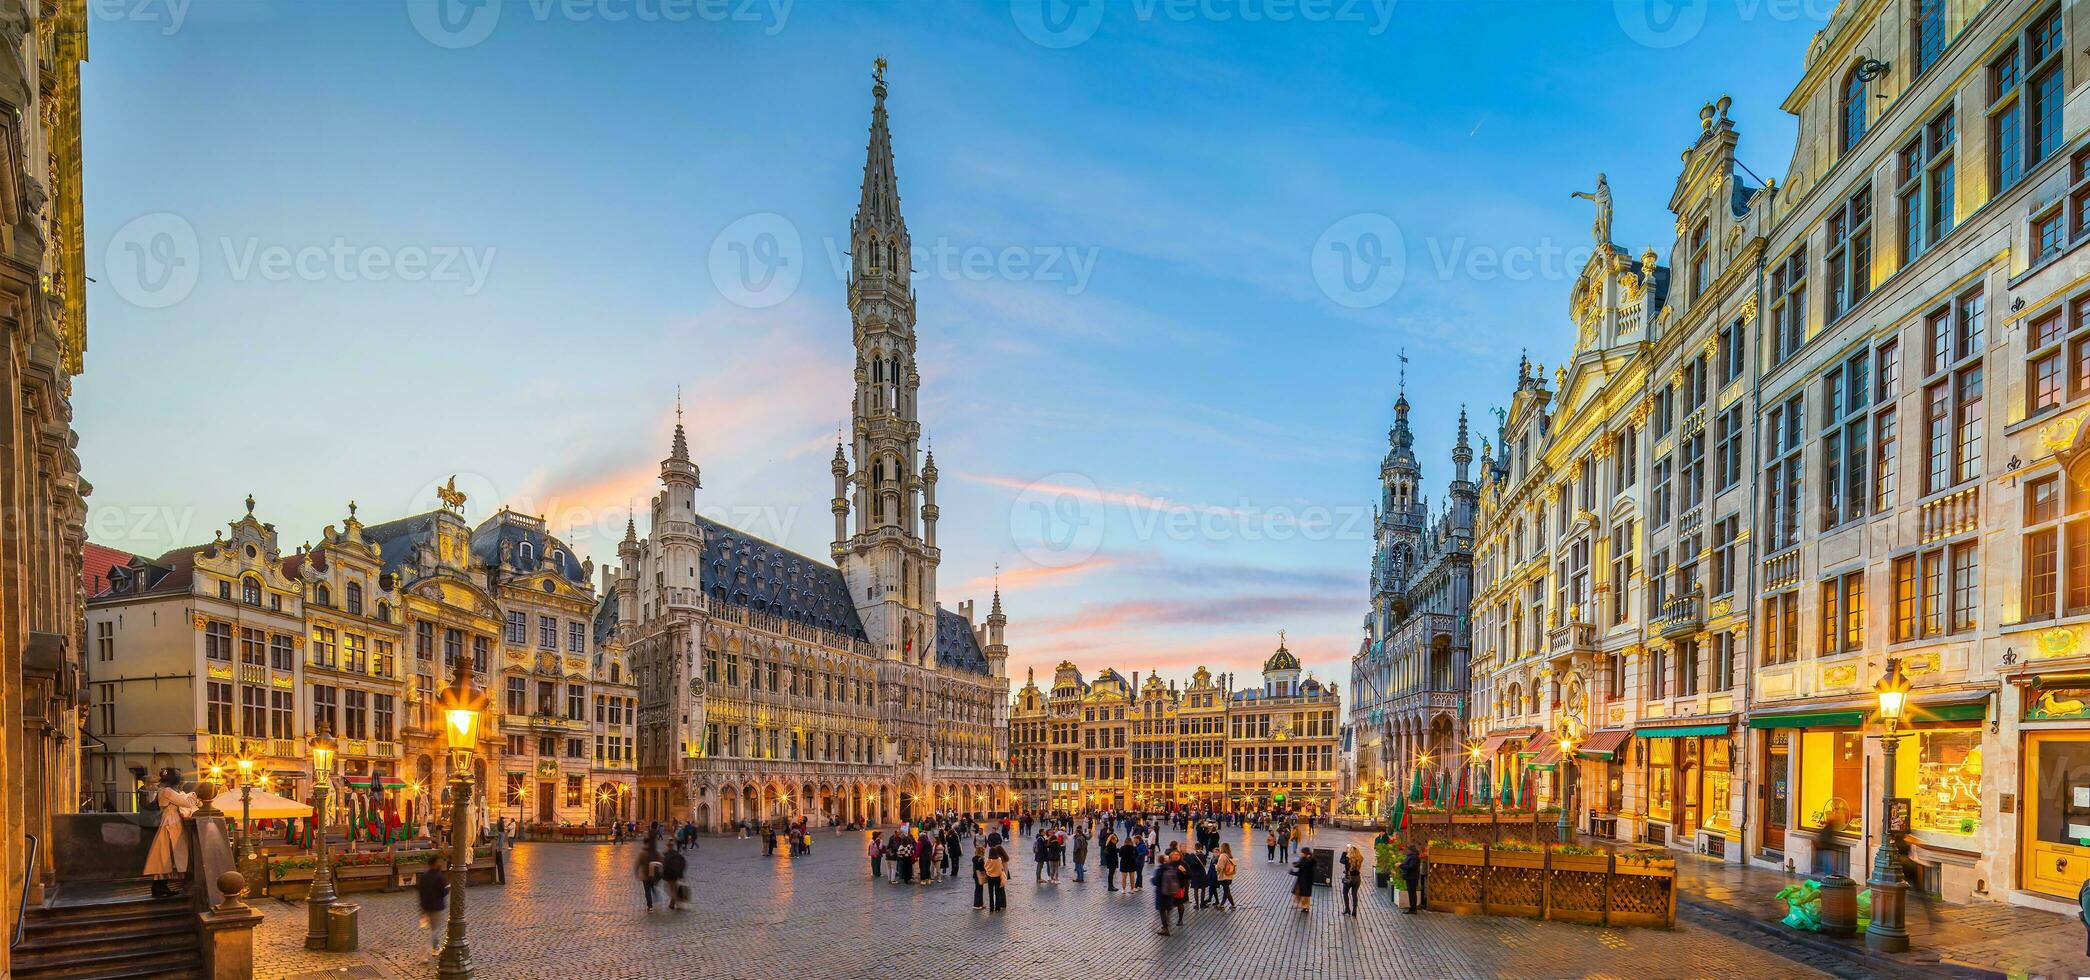 Grand Place in old town Brussels, Belgium city skyline photo